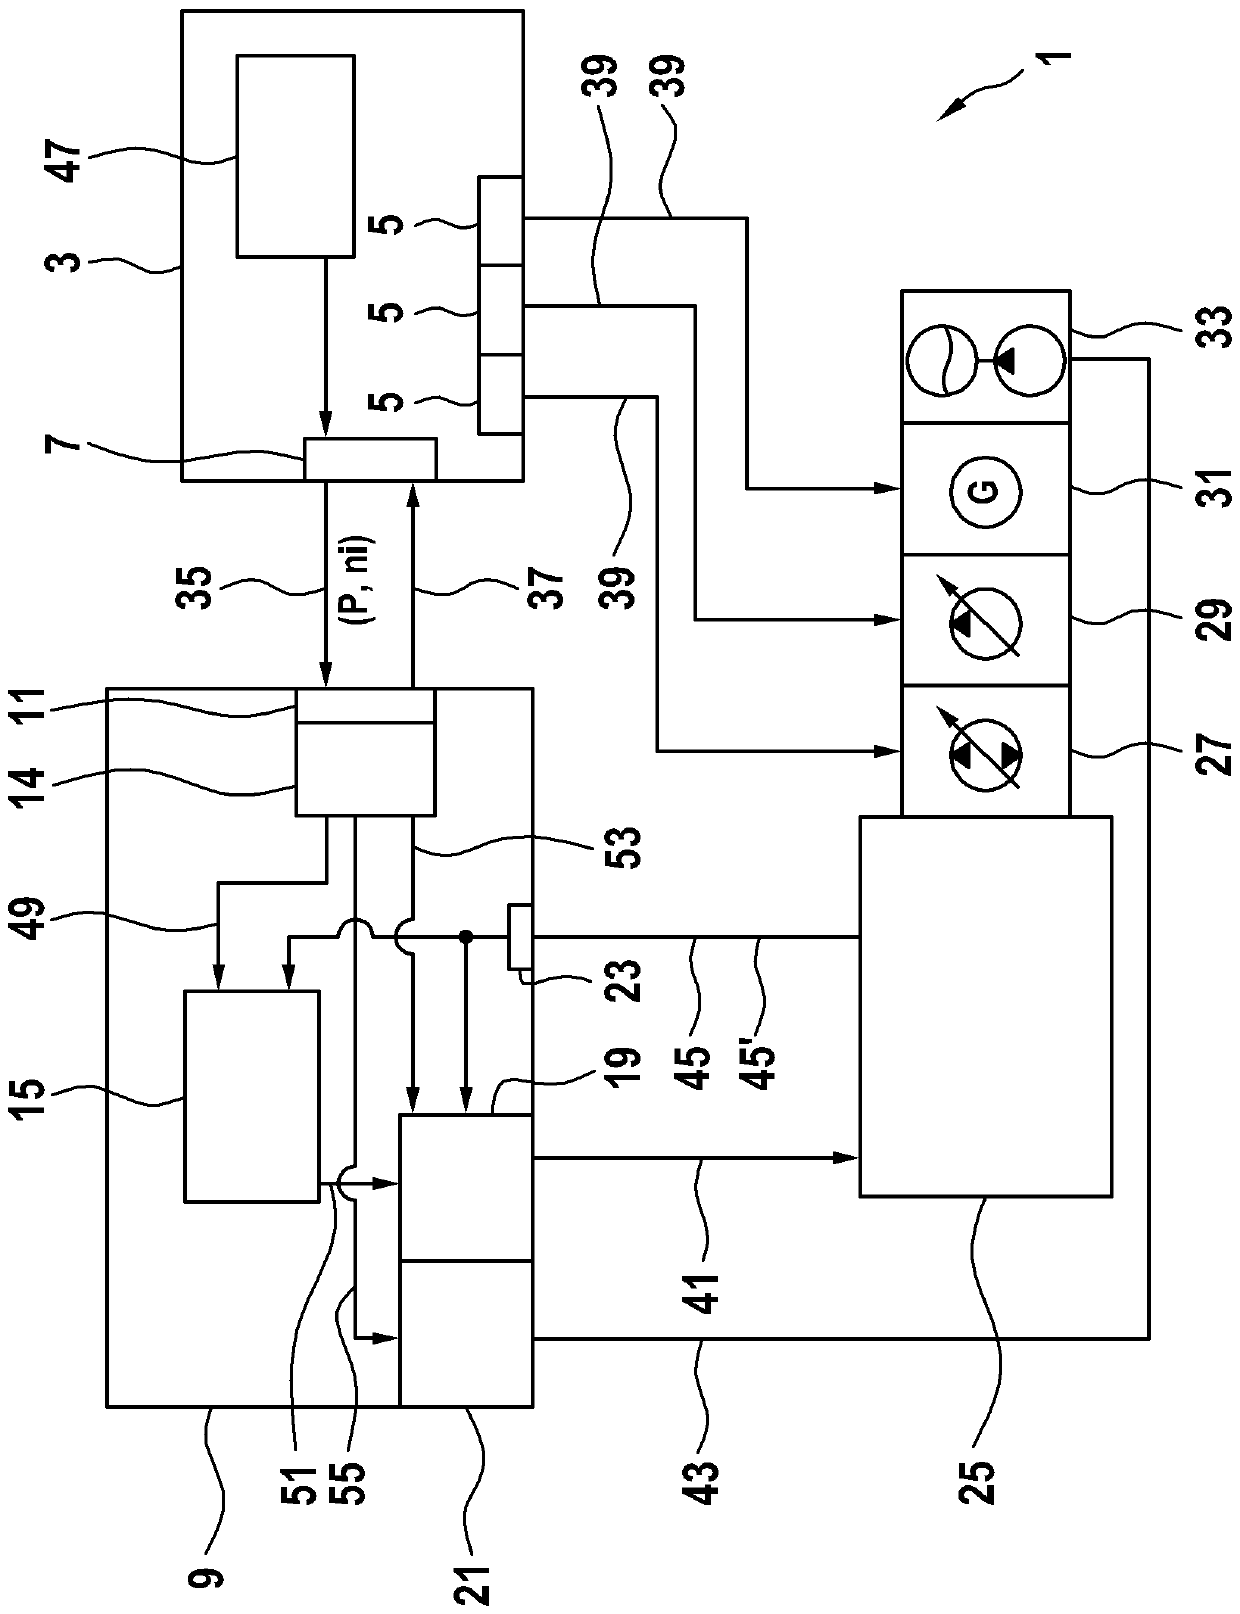 Drive control arrangement for a mobile working machine and interface